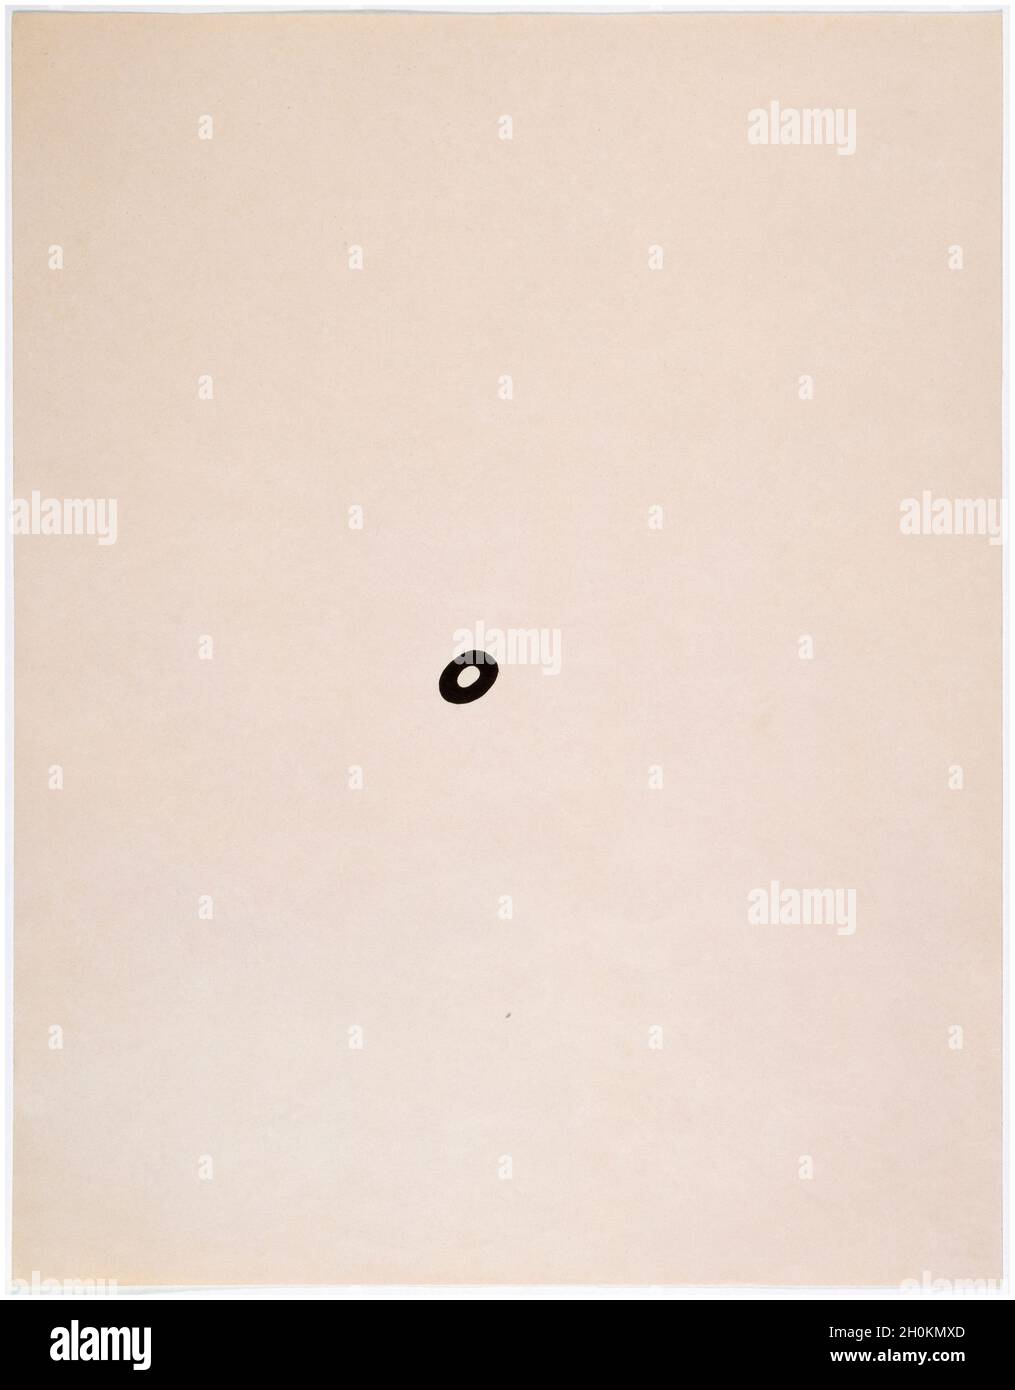 Kurt Schwitters, Jean Arp, A Navel, lithographic print, 1923 Stock Photo